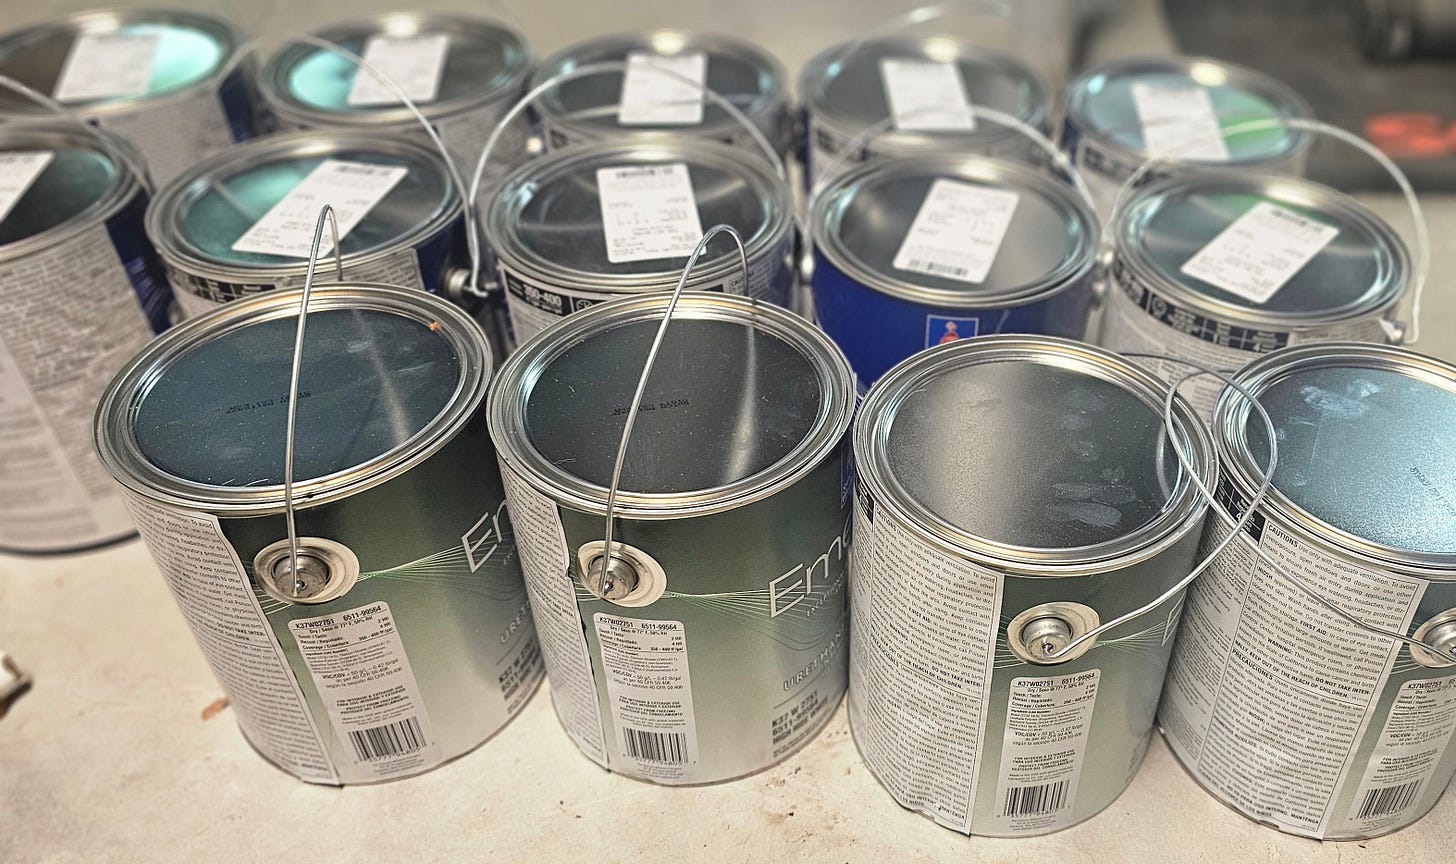 14 gallons of paint for Fix It project